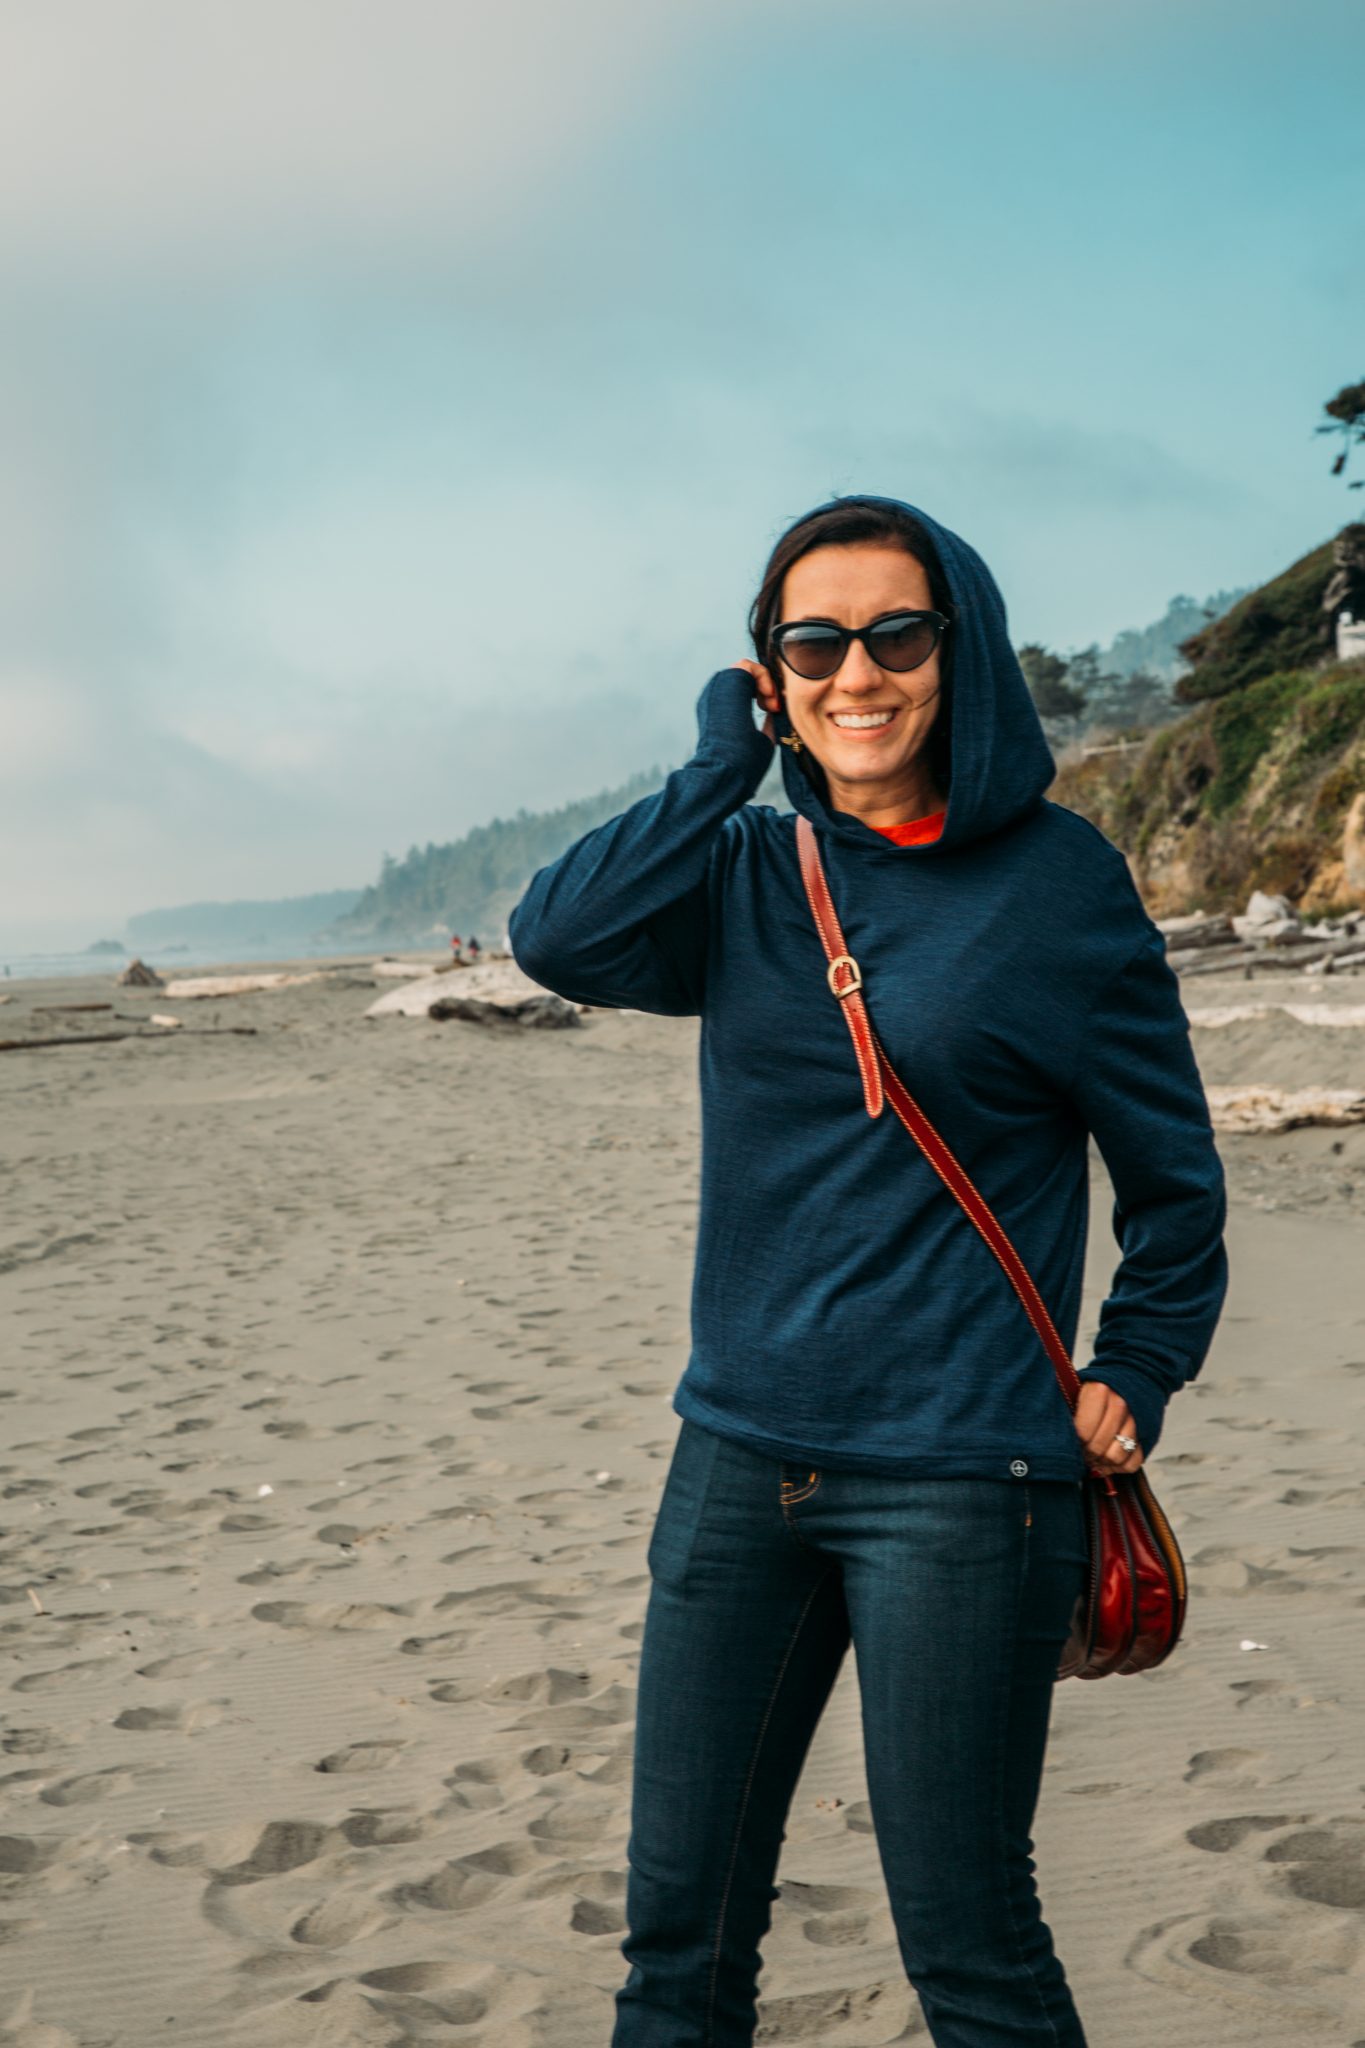 A woman poses on the beach on a cold, cloudy day, wearing a navy blue hooded sweatshirt and jeans.